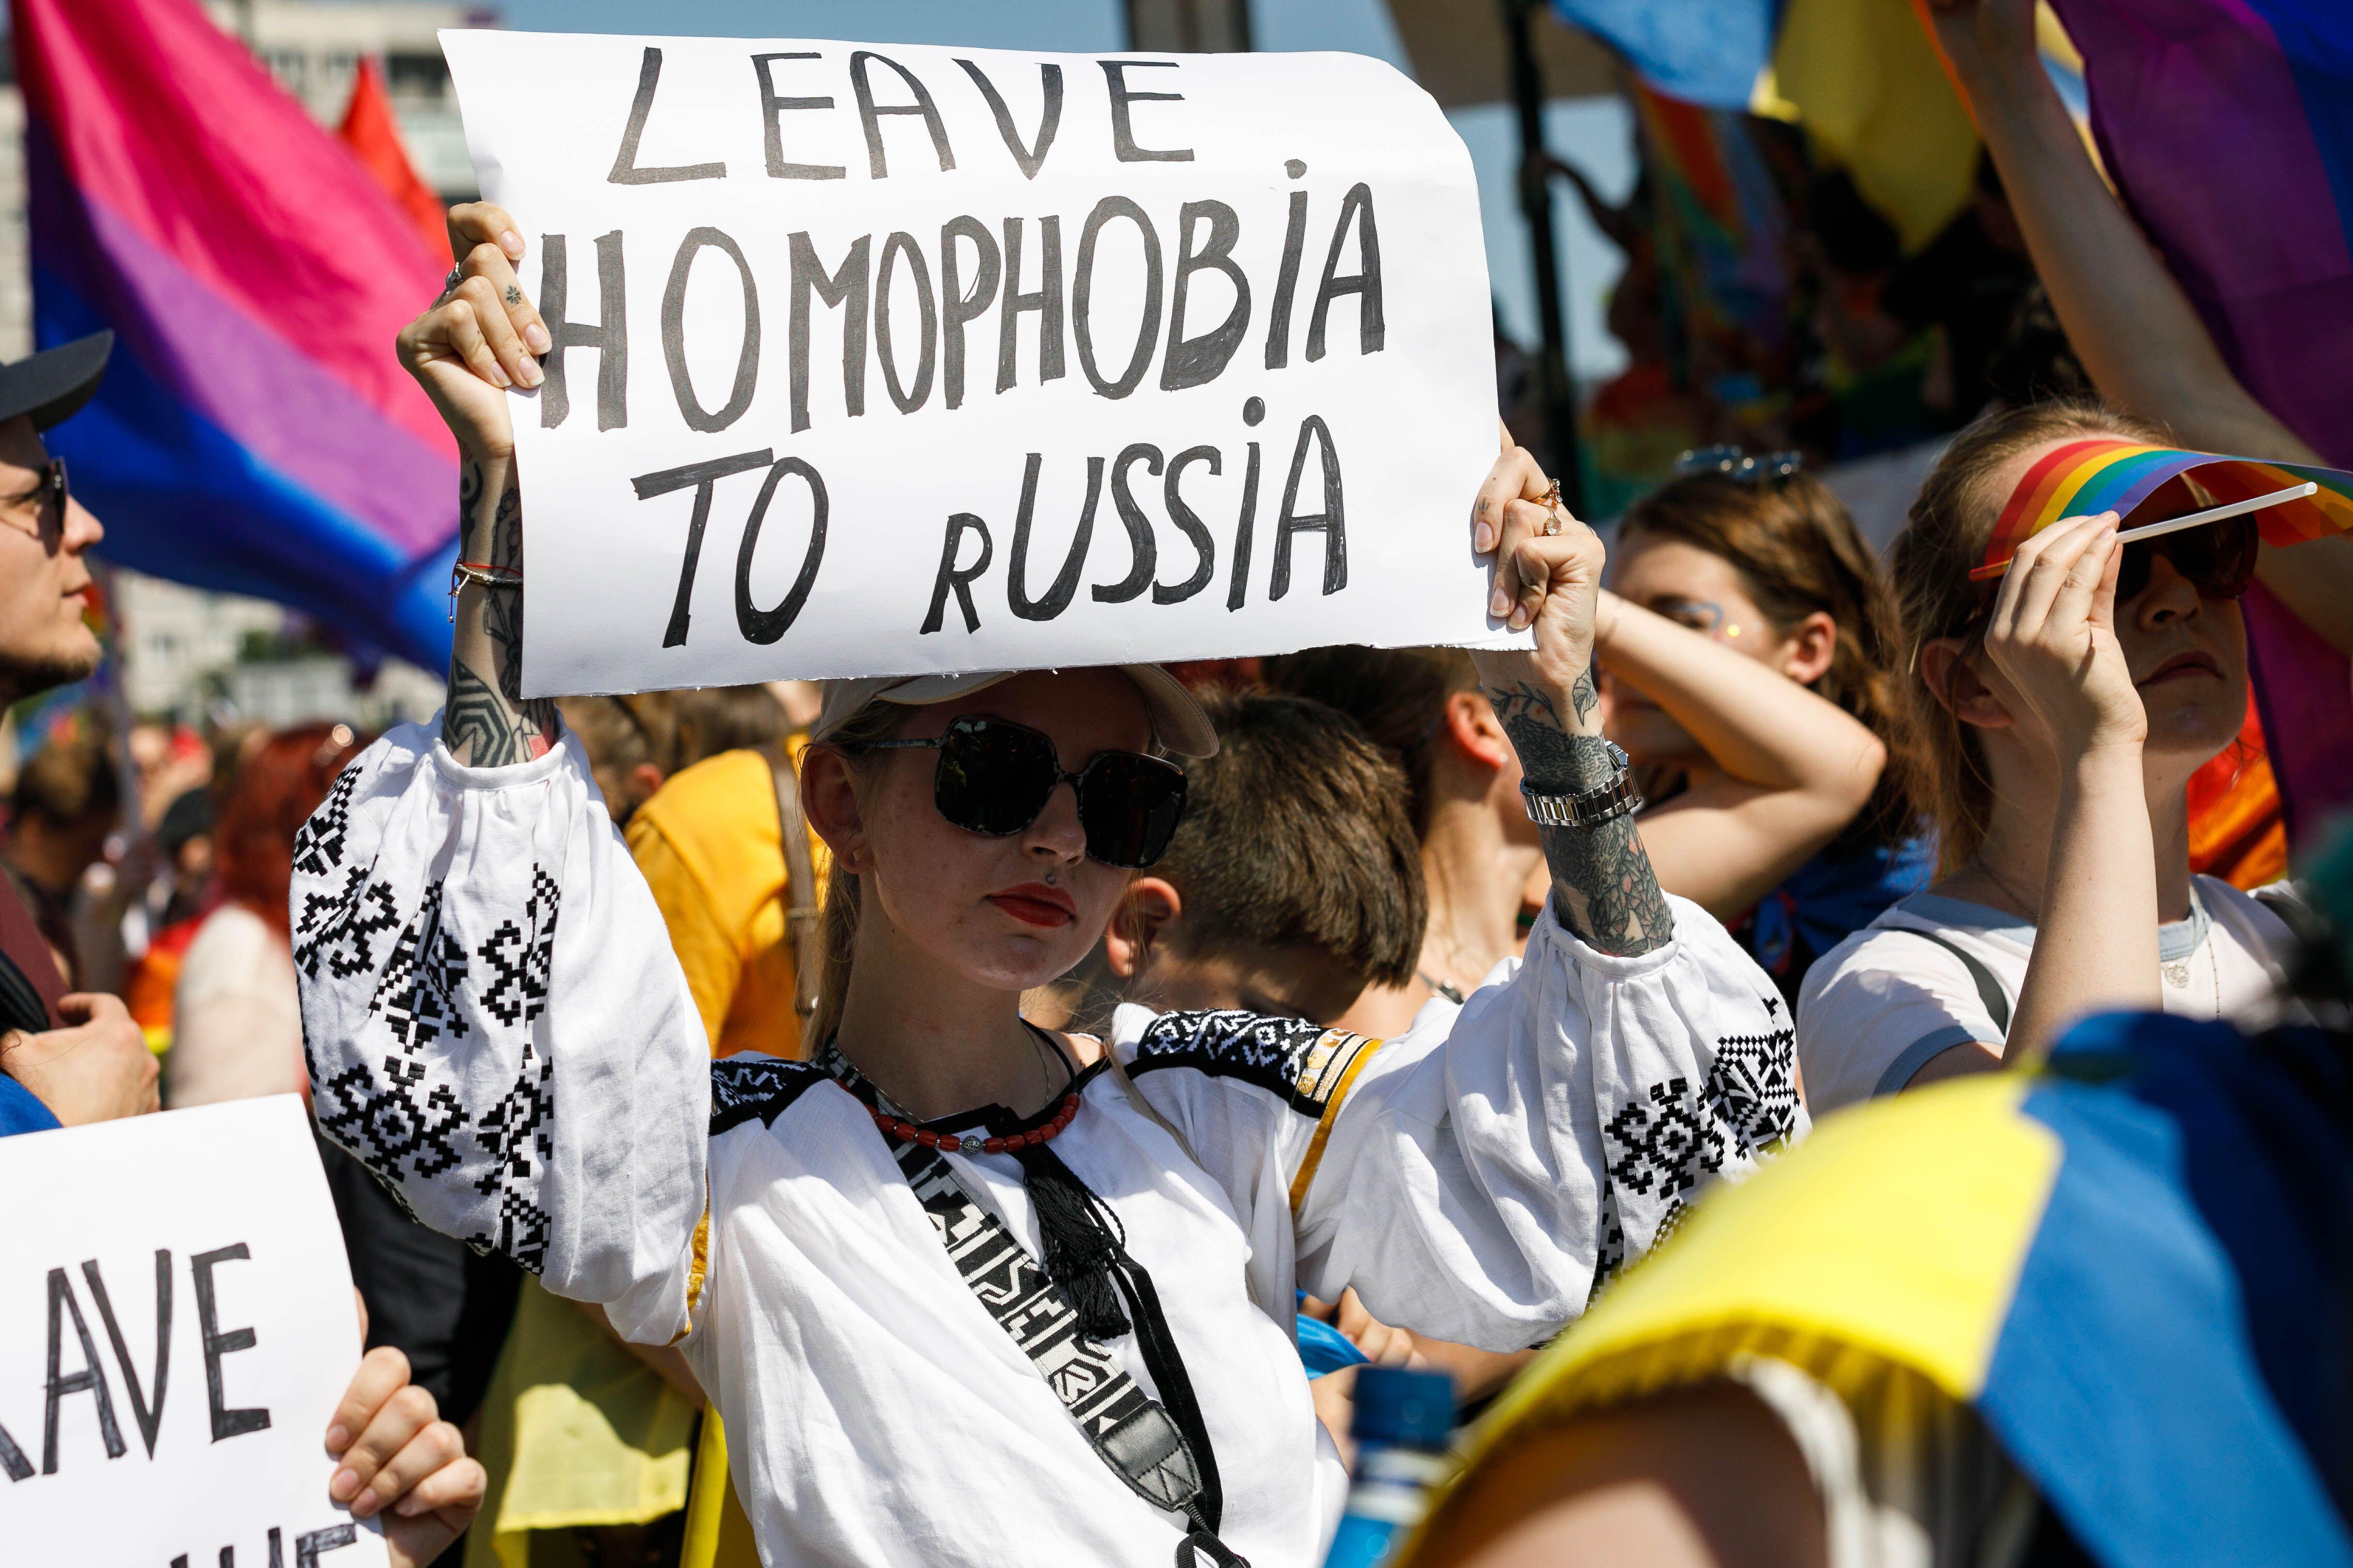 4550px x 3033px - Ukraine war: Russian soldiers accused of anti-gay attacks | openDemocracy